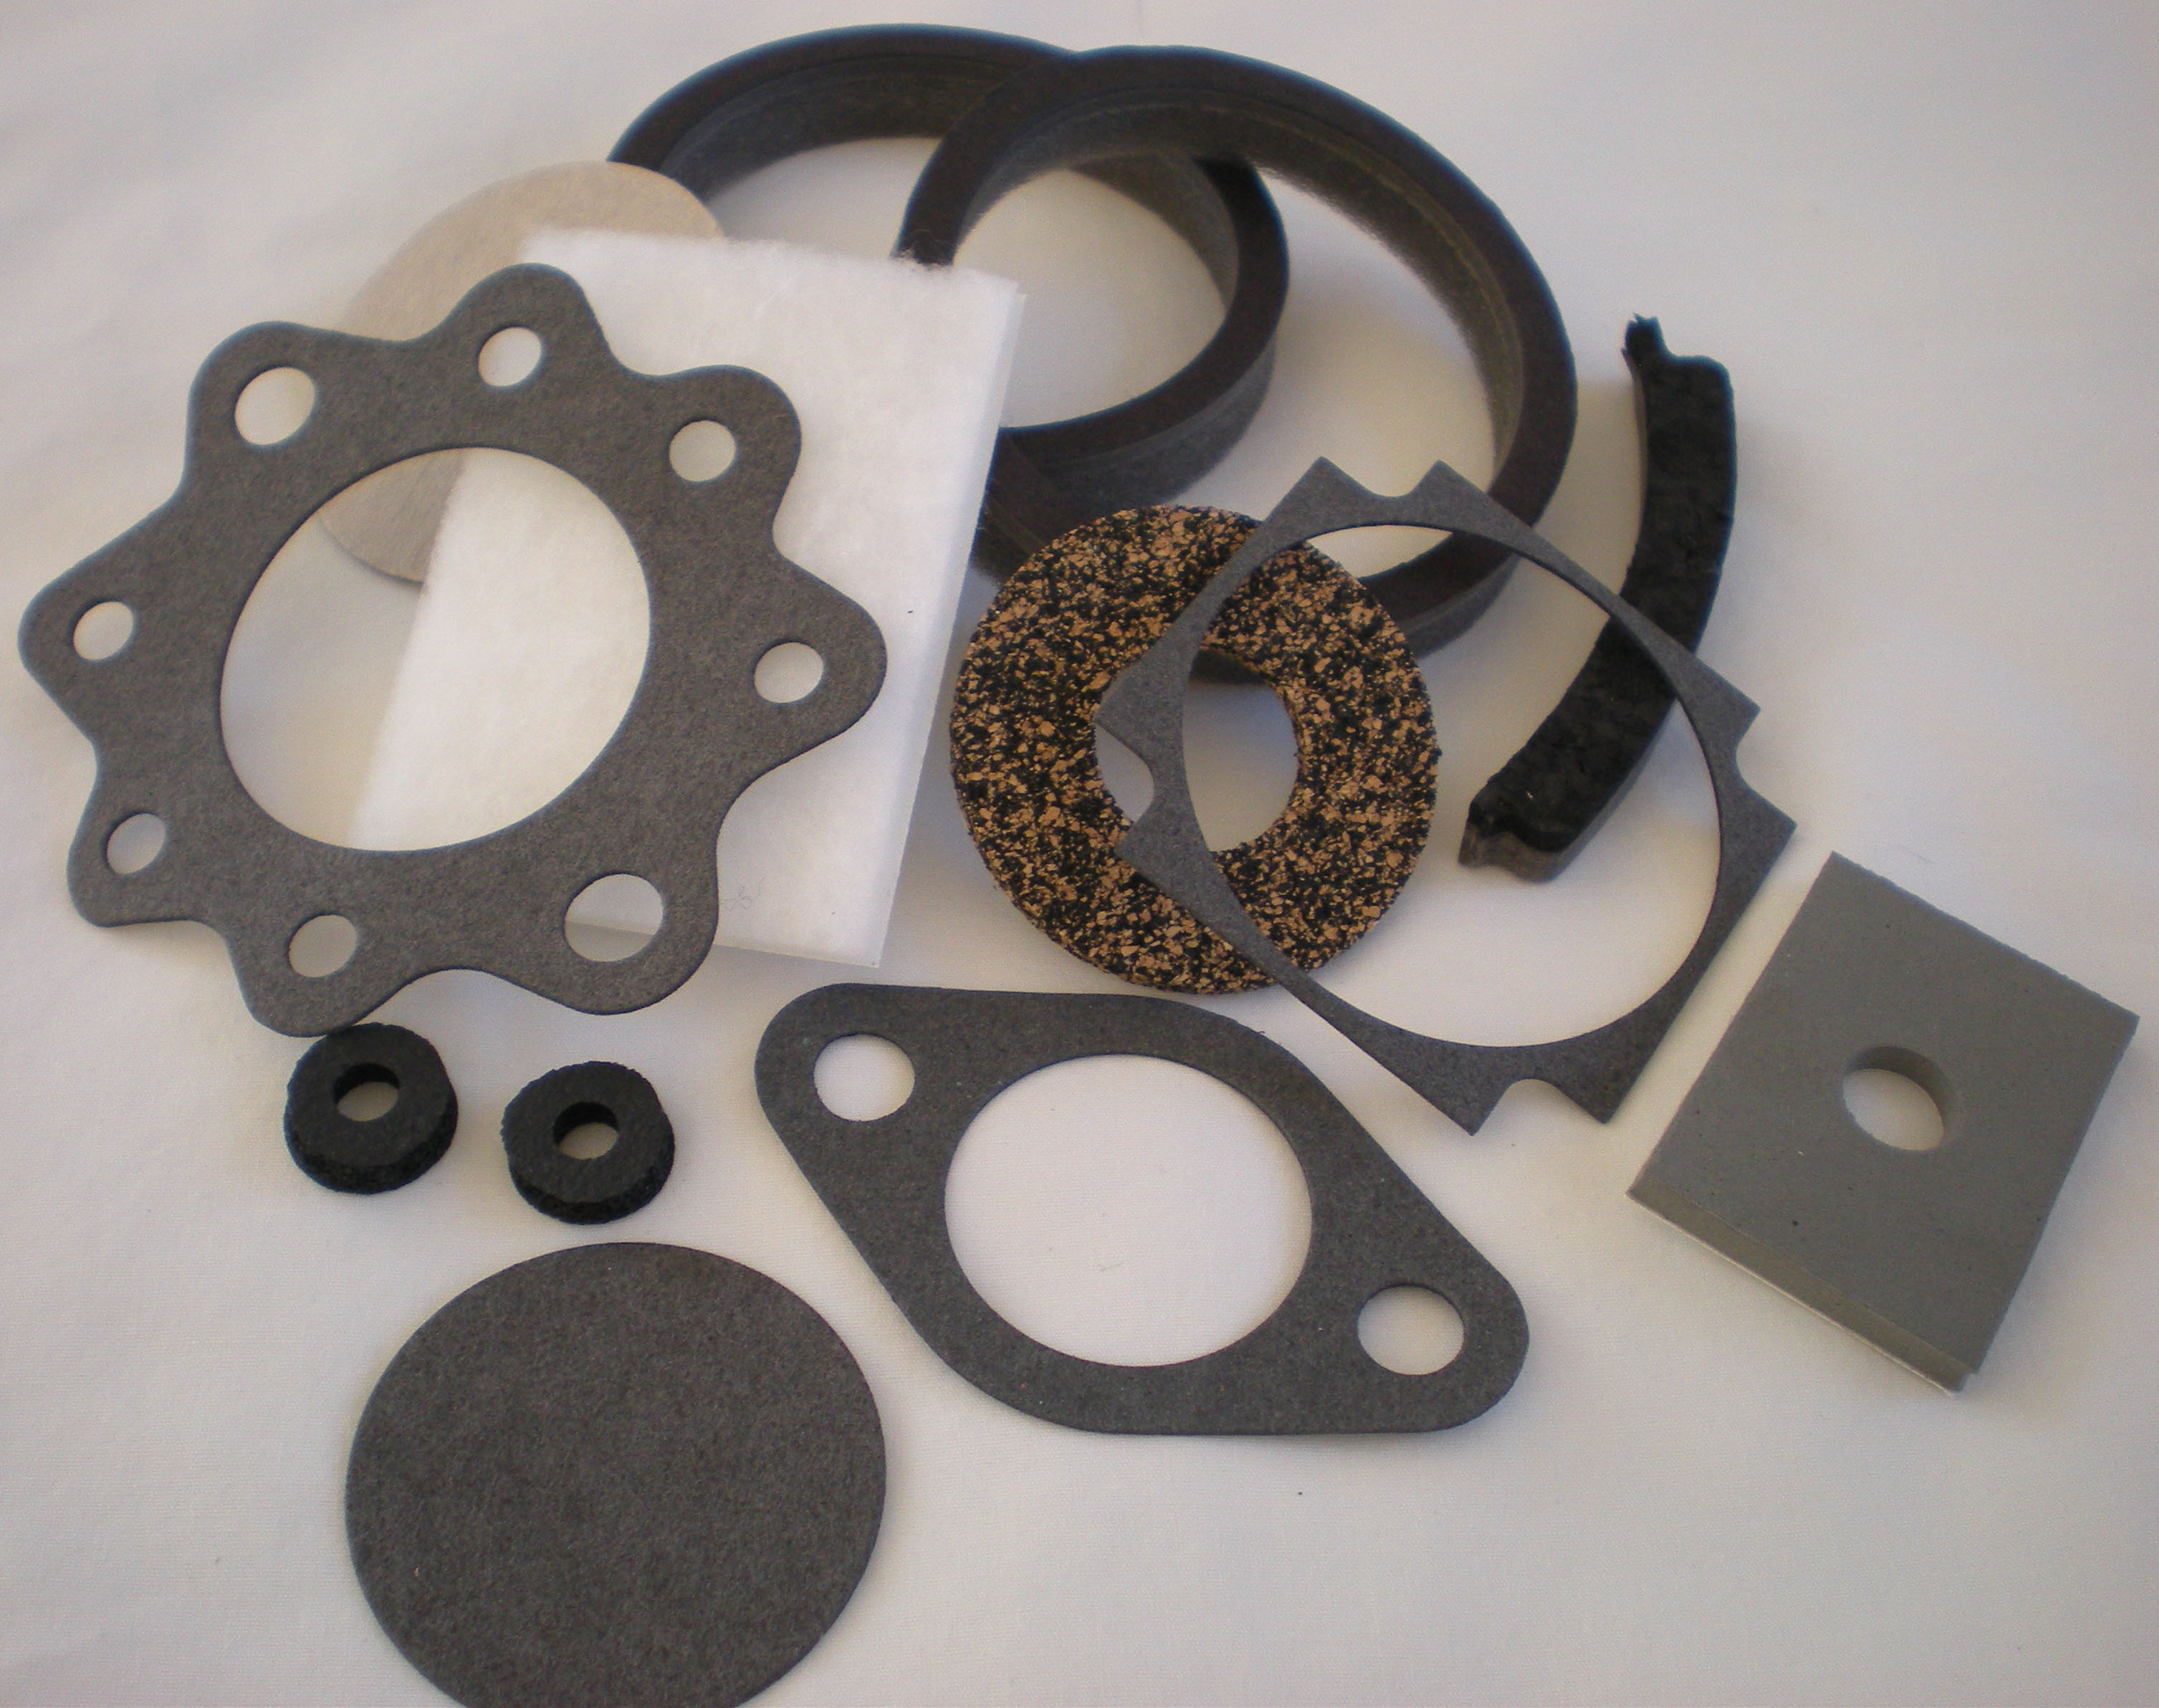 Self adhesive rubber gasket tape